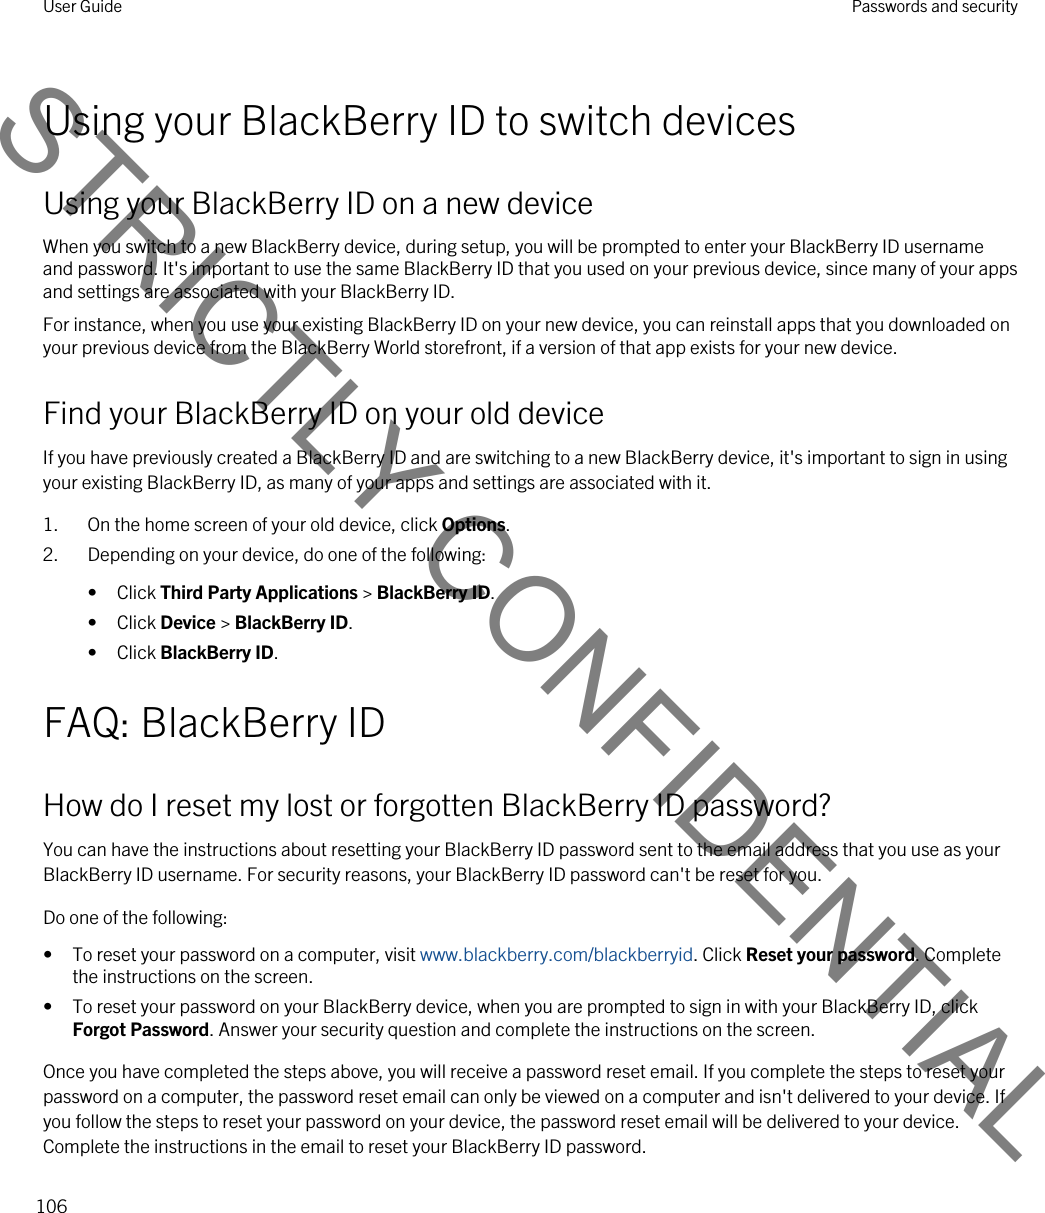 Using your BlackBerry ID to switch devicesUsing your BlackBerry ID on a new deviceWhen you switch to a new BlackBerry device, during setup, you will be prompted to enter your BlackBerry ID username and password. It&apos;s important to use the same BlackBerry ID that you used on your previous device, since many of your apps and settings are associated with your BlackBerry ID.For instance, when you use your existing BlackBerry ID on your new device, you can reinstall apps that you downloaded on your previous device from the BlackBerry World storefront, if a version of that app exists for your new device.Find your BlackBerry ID on your old deviceIf you have previously created a BlackBerry ID and are switching to a new BlackBerry device, it&apos;s important to sign in using your existing BlackBerry ID, as many of your apps and settings are associated with it.1. On the home screen of your old device, click Options.2. Depending on your device, do one of the following:• Click Third Party Applications &gt; BlackBerry ID.• Click Device &gt; BlackBerry ID.• Click BlackBerry ID.FAQ: BlackBerry IDHow do I reset my lost or forgotten BlackBerry ID password?You can have the instructions about resetting your BlackBerry ID password sent to the email address that you use as your BlackBerry ID username. For security reasons, your BlackBerry ID password can&apos;t be reset for you.Do one of the following:• To reset your password on a computer, visit www.blackberry.com/blackberryid. Click Reset your password. Complete the instructions on the screen.• To reset your password on your BlackBerry device, when you are prompted to sign in with your BlackBerry ID, click Forgot Password. Answer your security question and complete the instructions on the screen.Once you have completed the steps above, you will receive a password reset email. If you complete the steps to reset your password on a computer, the password reset email can only be viewed on a computer and isn&apos;t delivered to your device. If you follow the steps to reset your password on your device, the password reset email will be delivered to your device. Complete the instructions in the email to reset your BlackBerry ID password.User Guide Passwords and security106STRICTLY CONFIDENTIAL